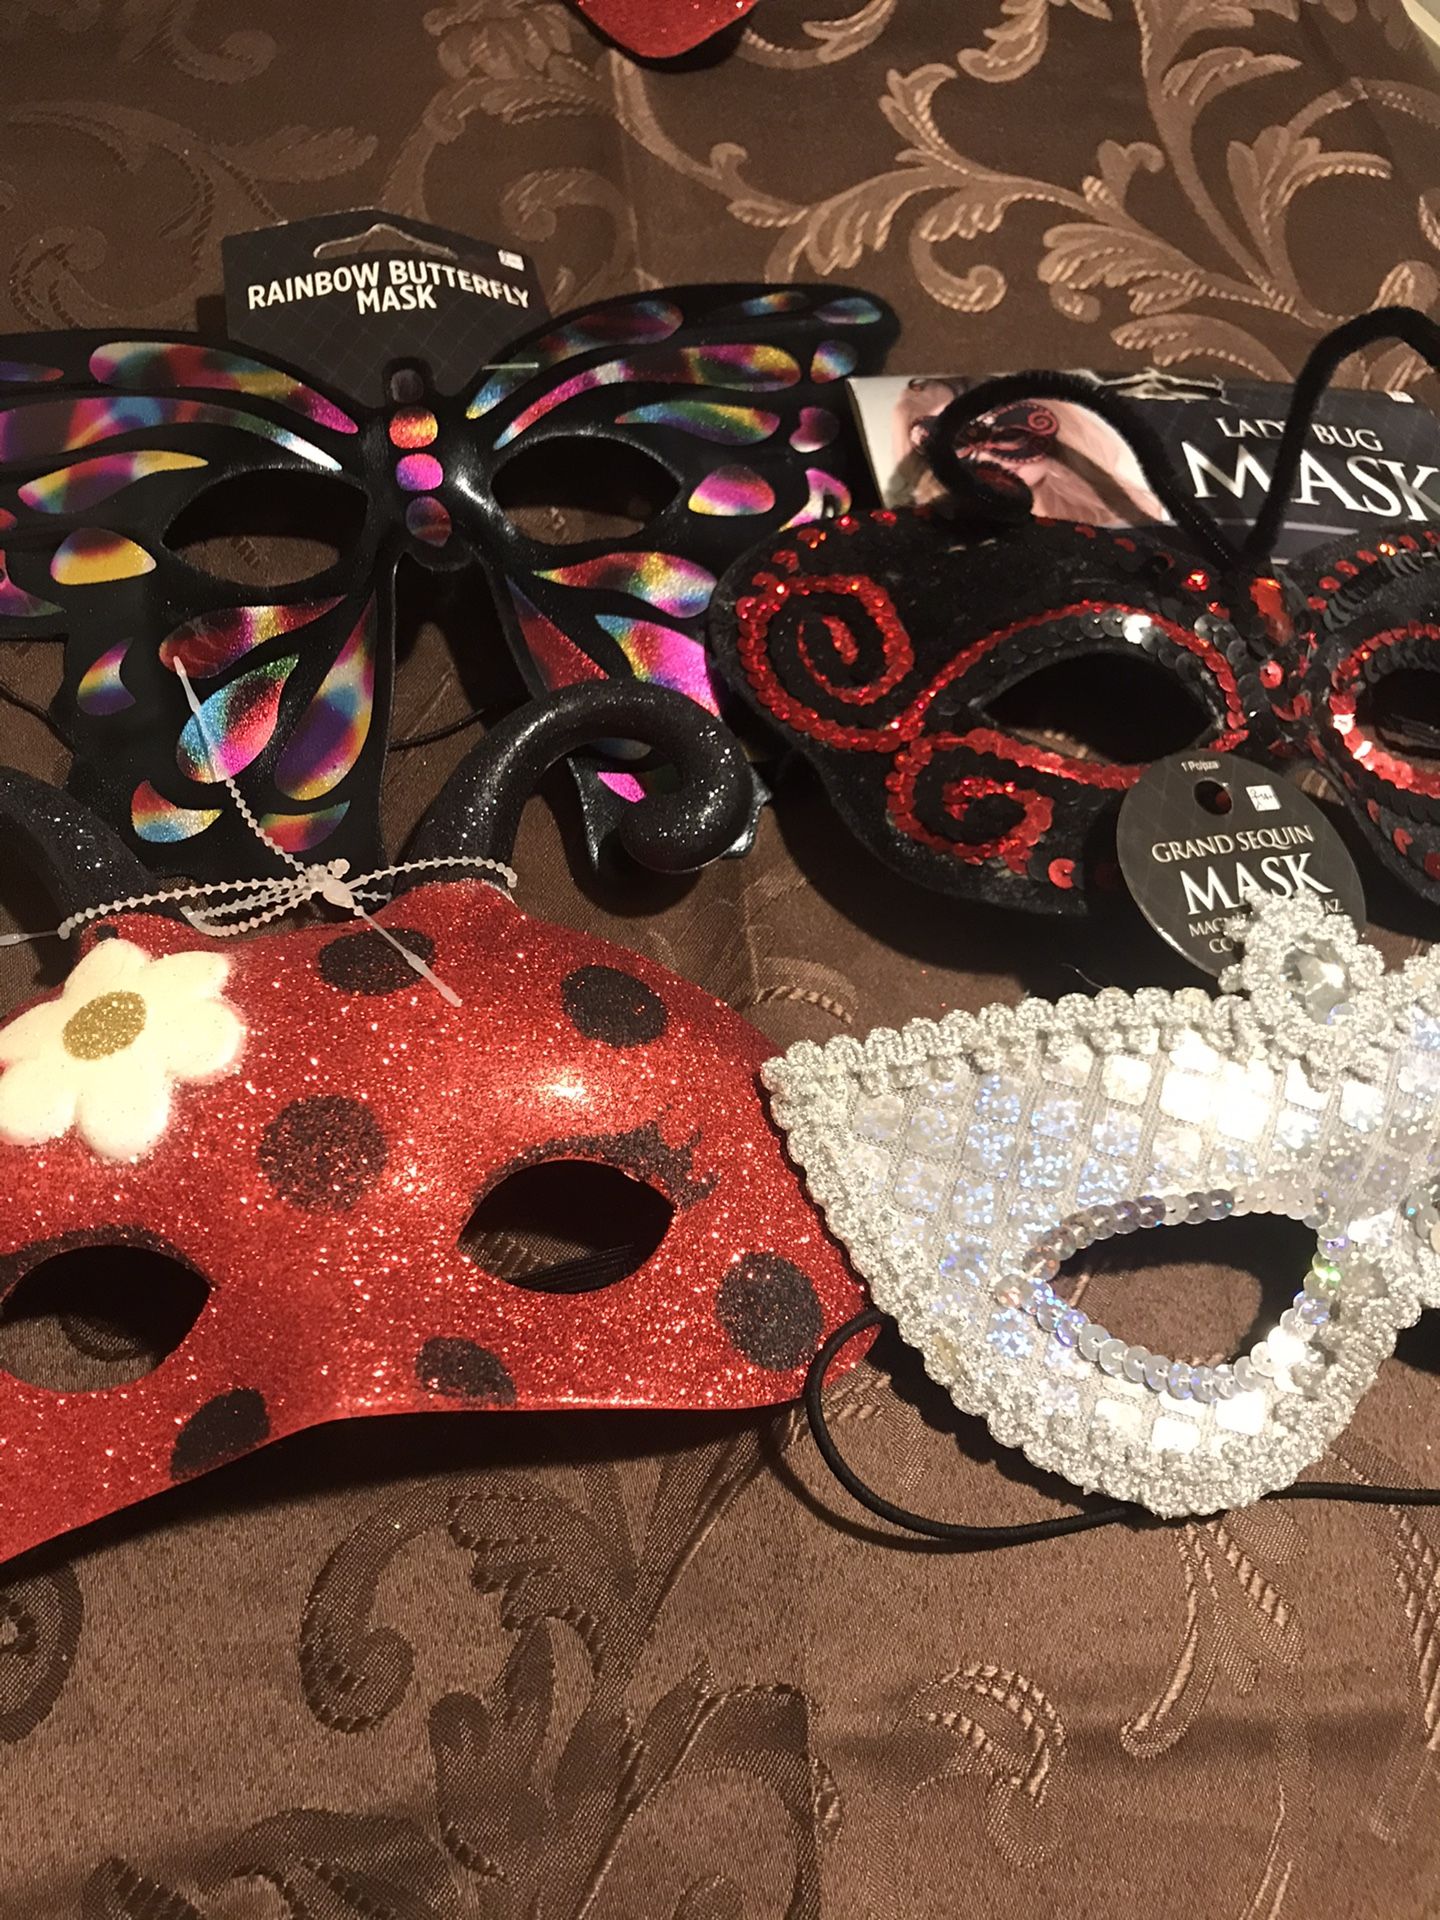 Ladybug and butterfly masks